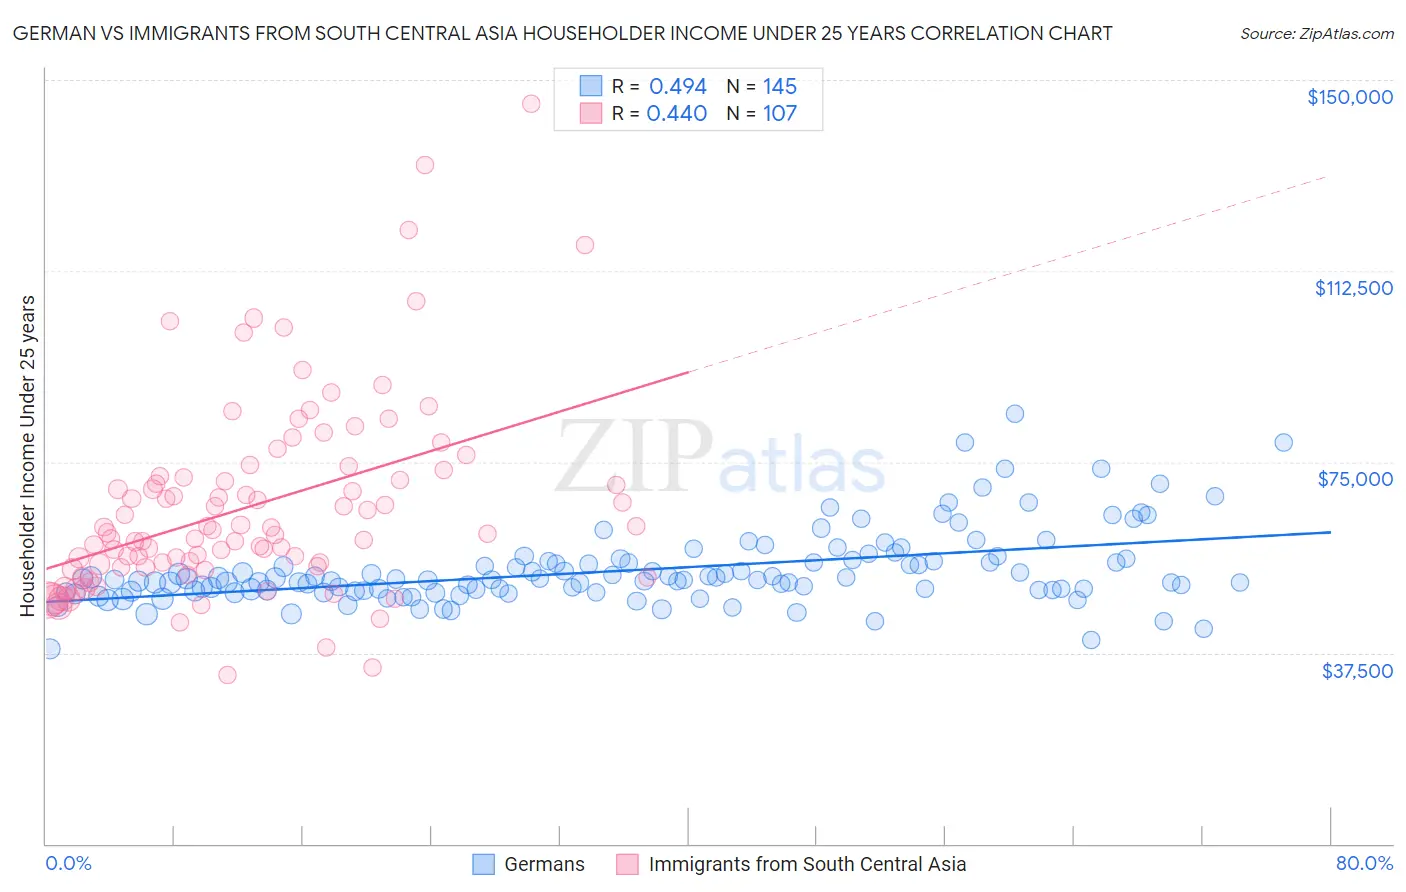 German vs Immigrants from South Central Asia Householder Income Under 25 years